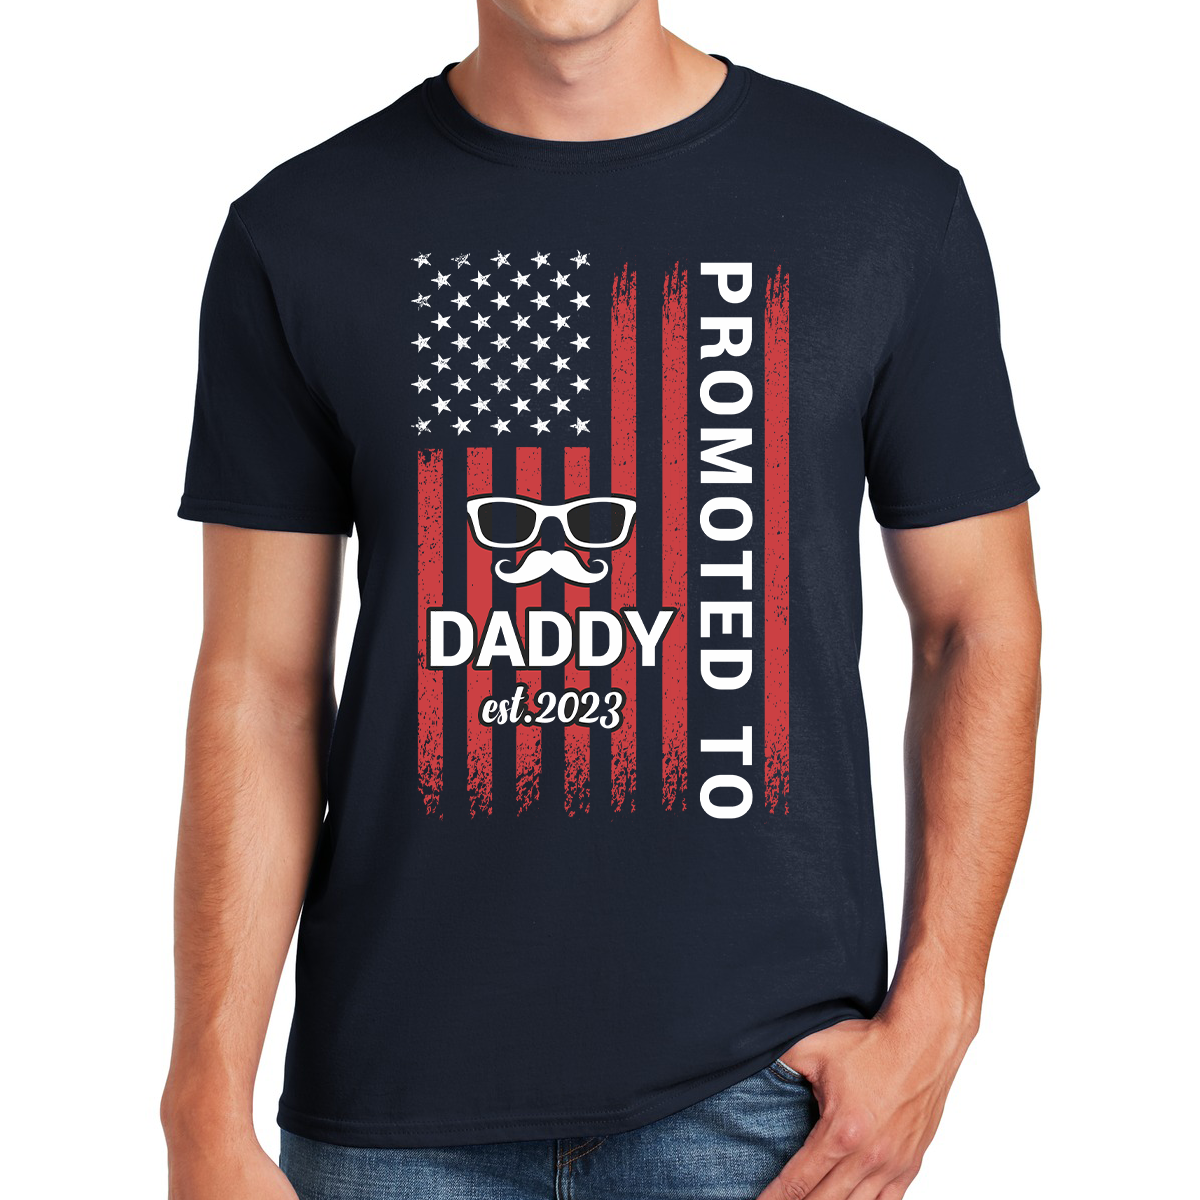 Promoted To Daddy Est. 2023 The Adventure Begins Awesome Dad T-shirt